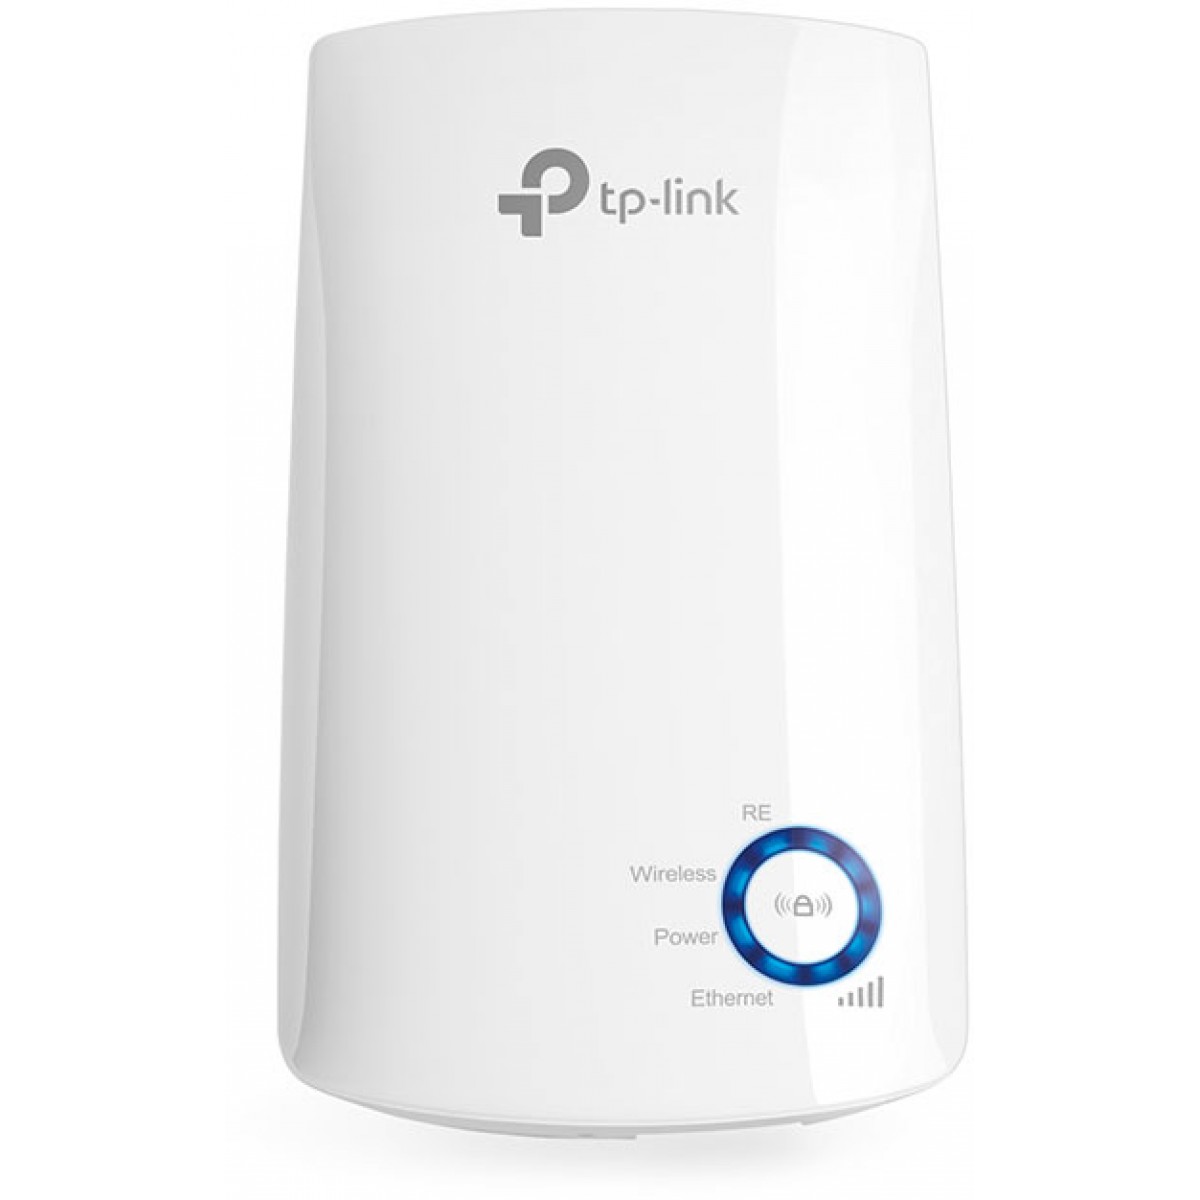 Repetidor Expansor TP-Link Wi-Fi Network 300Mbps, TL-WA850RE